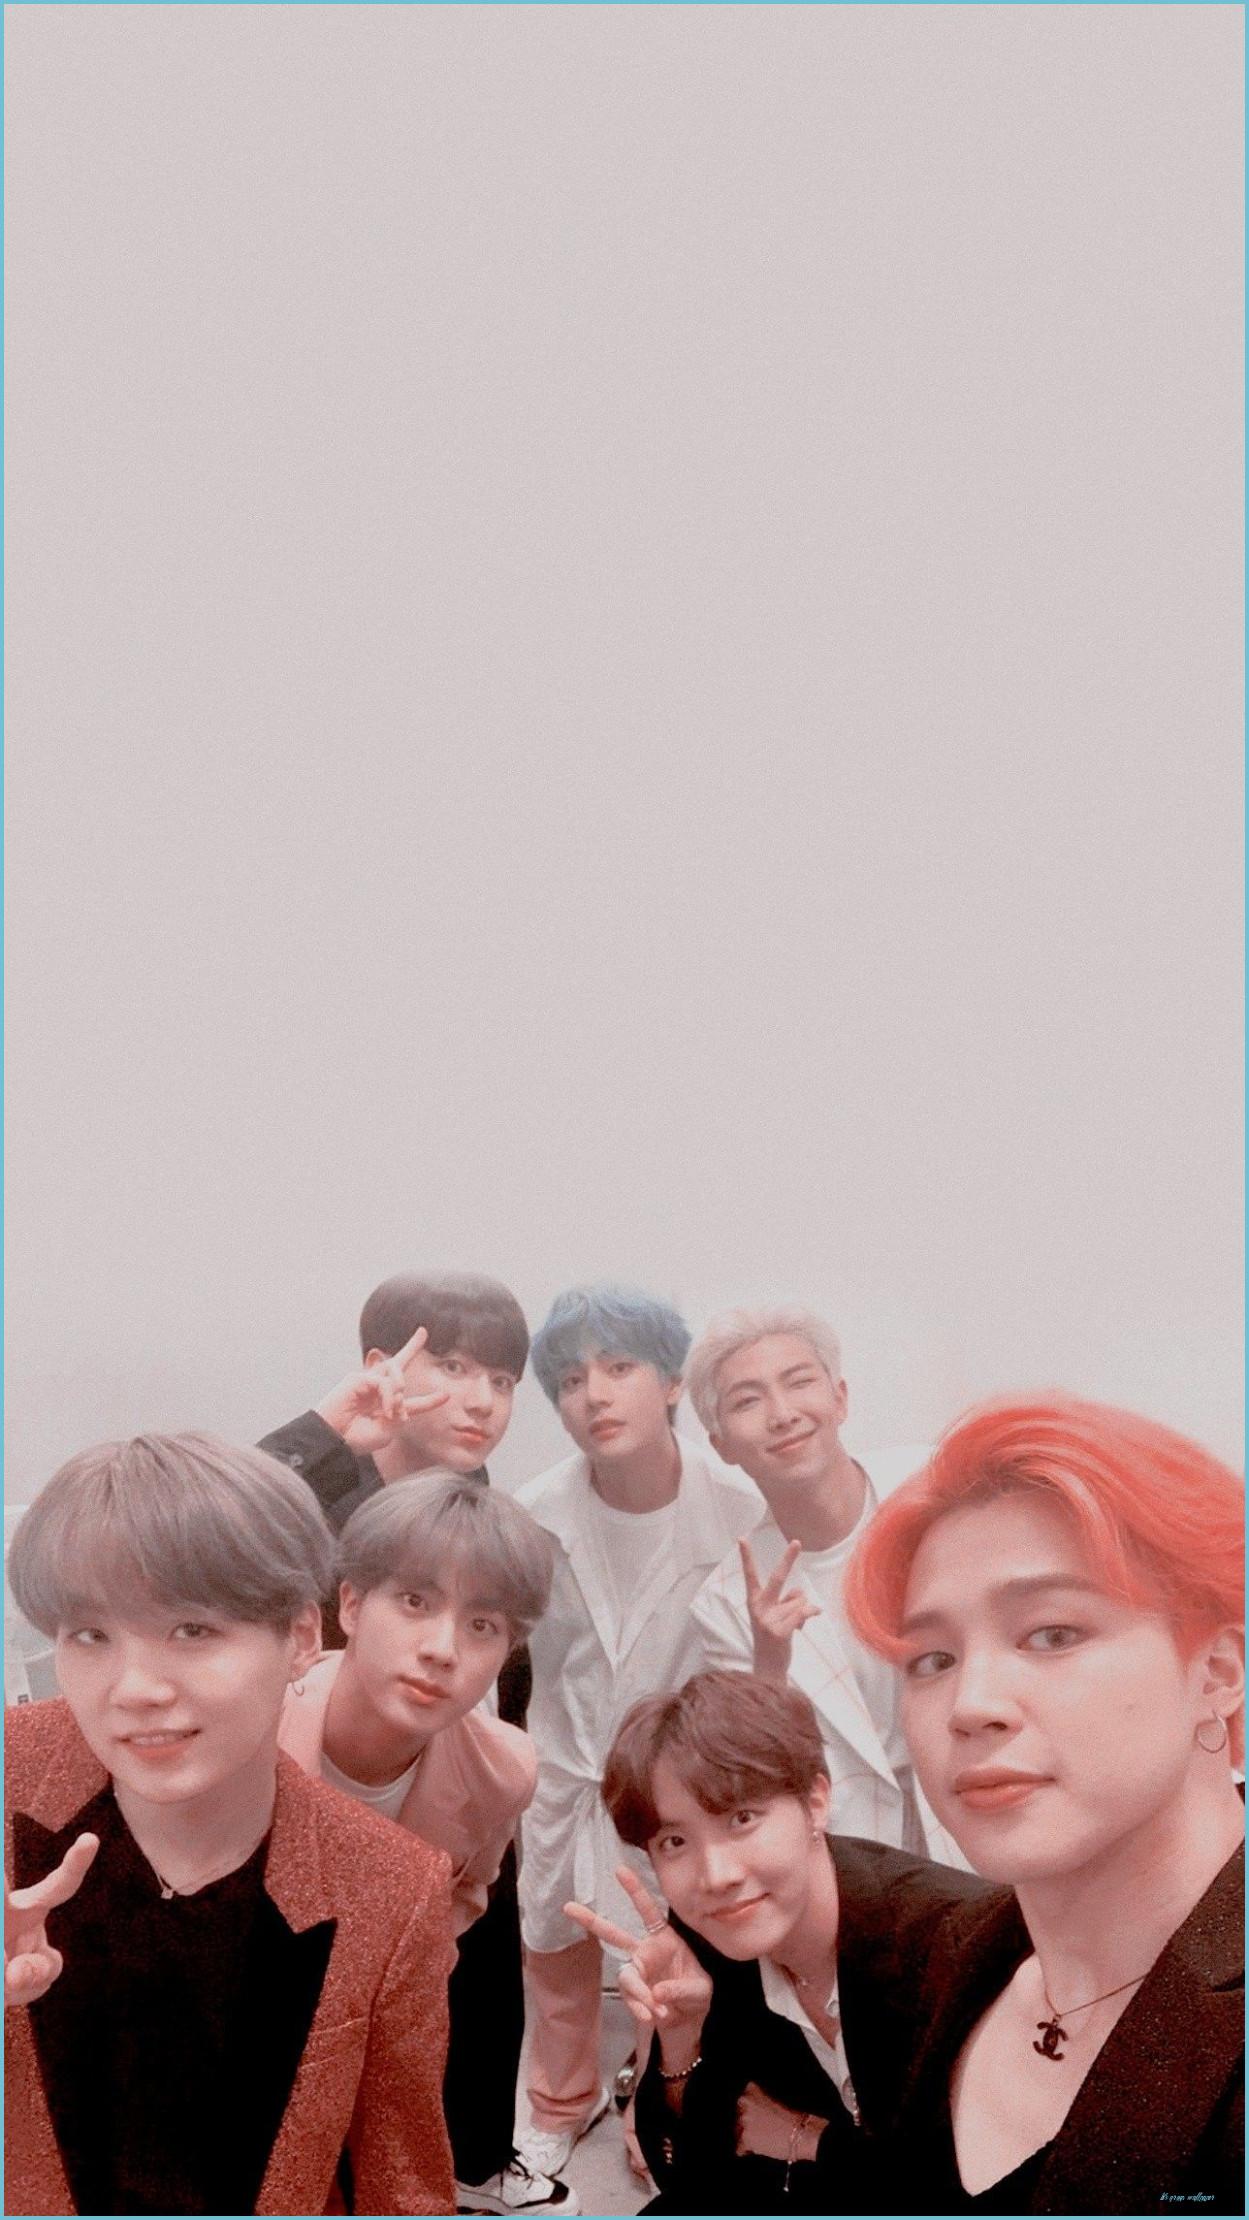 Bts Group Photo Wallpapers - Top Free Bts Group Photo Backgrounds ...